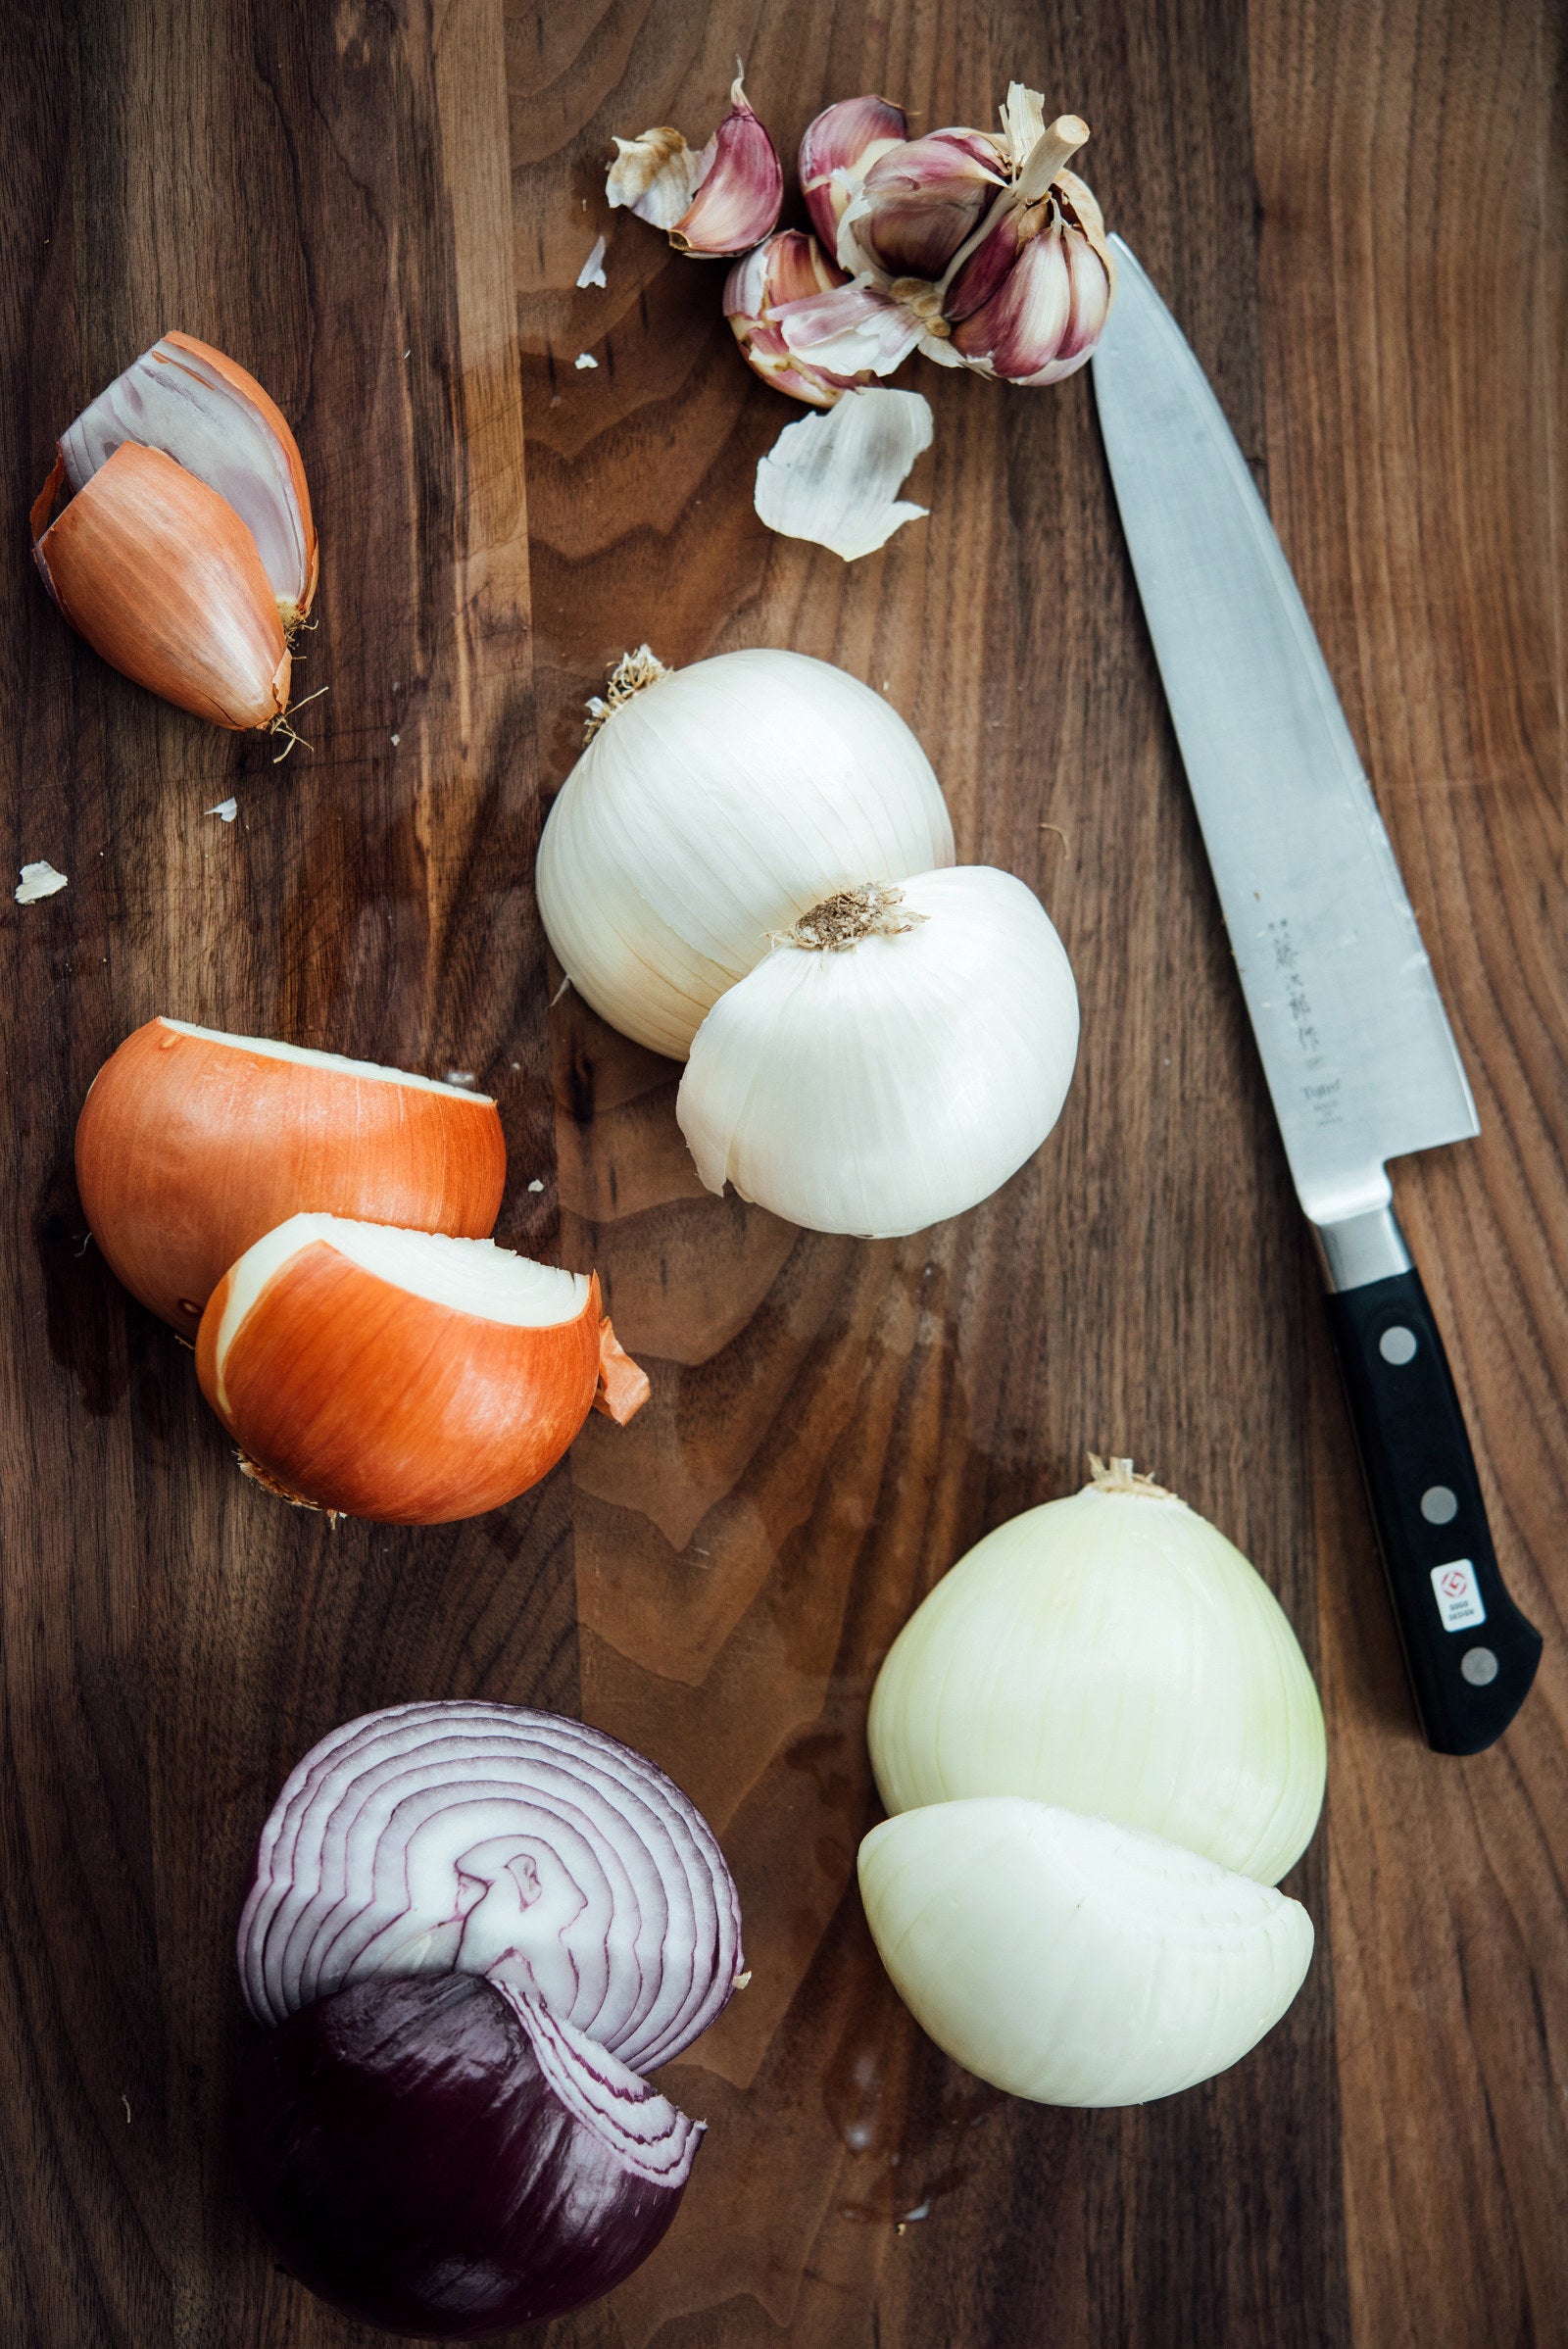 9 Ways to Chop an Onion without Shedding Tears